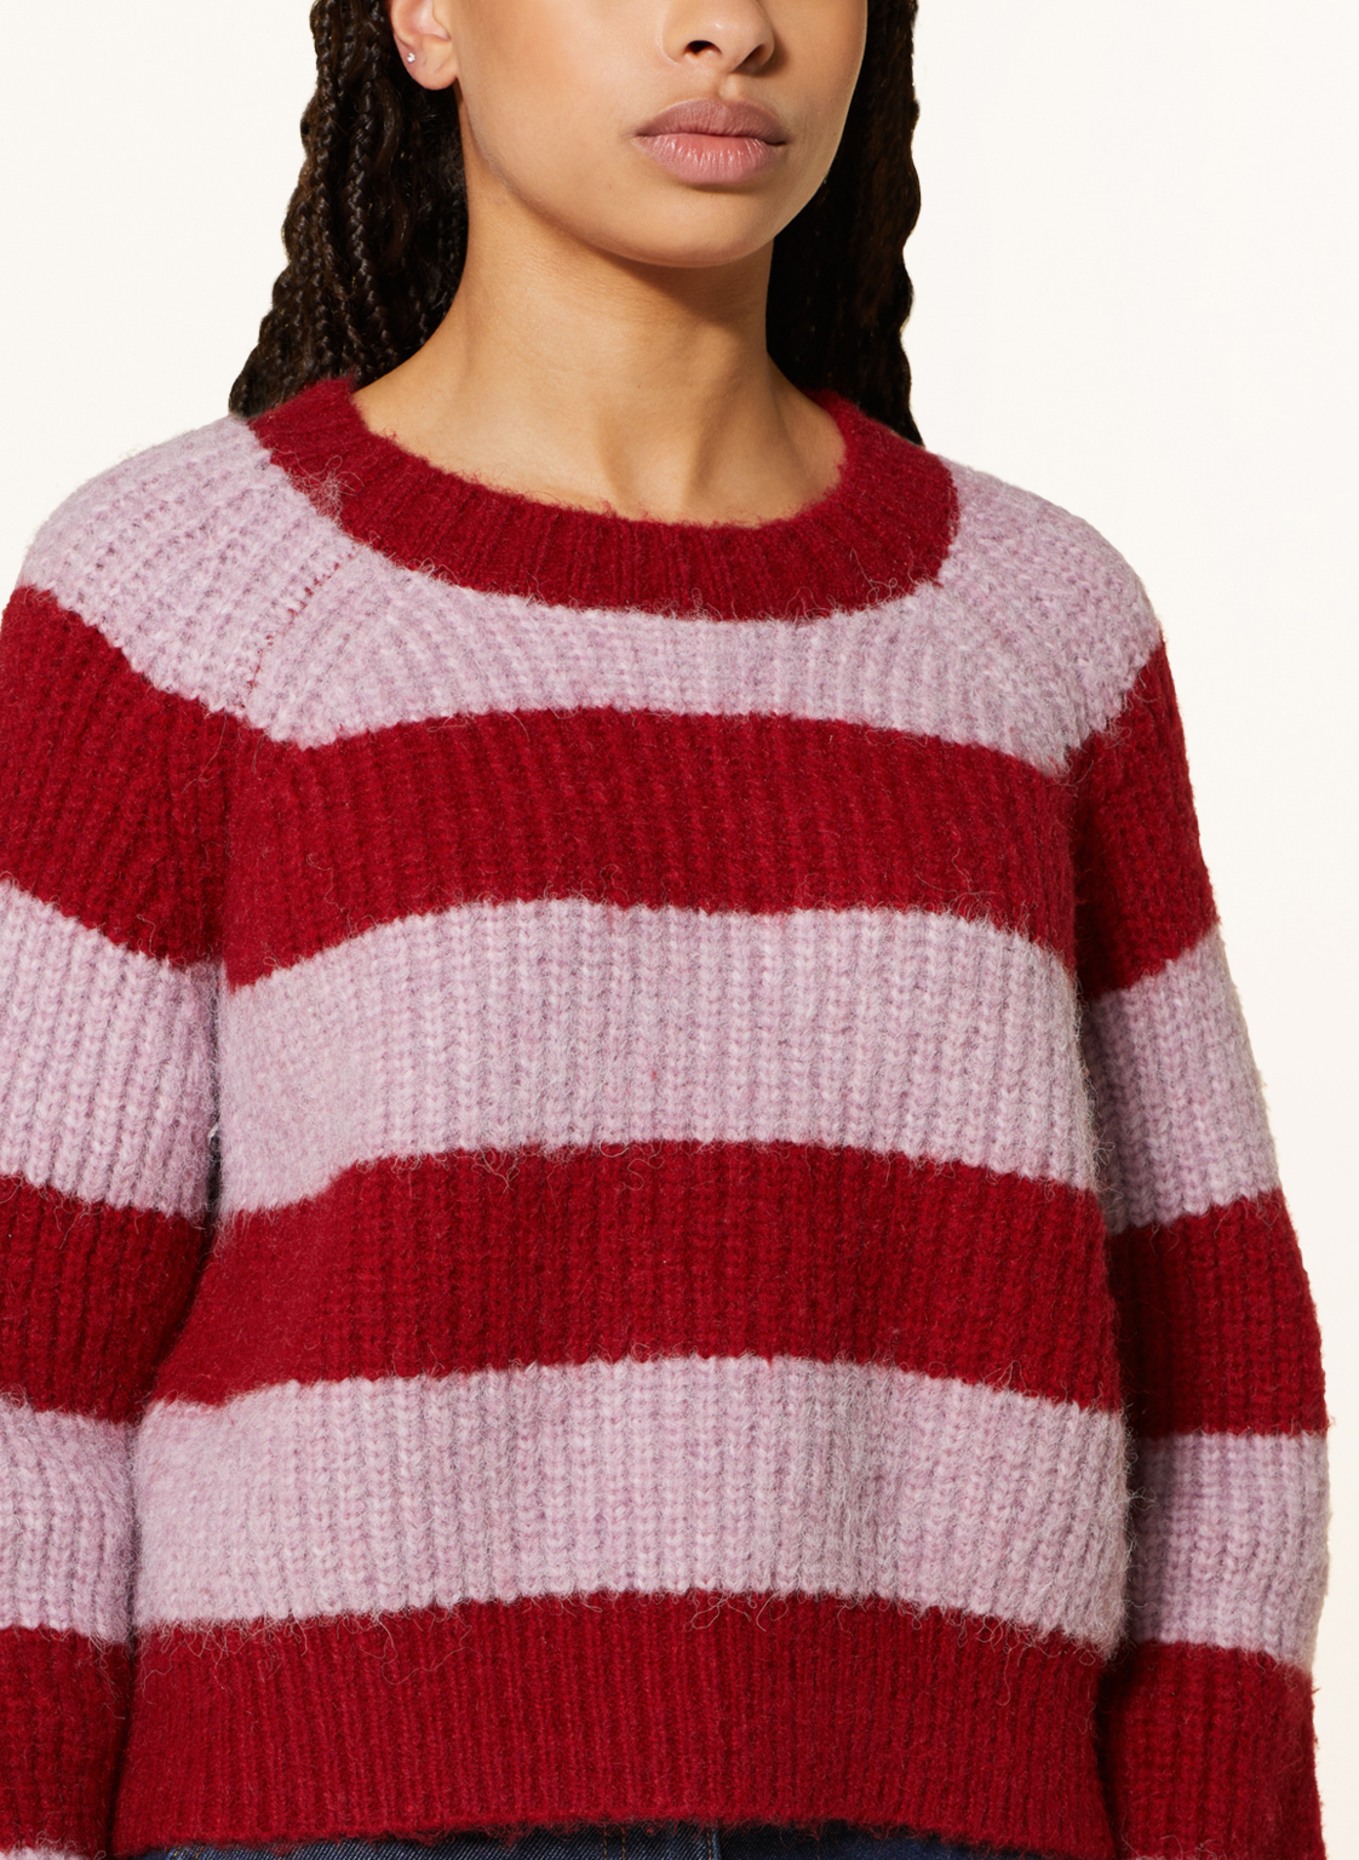 COLOURFUL REBEL Sweater, Color: DARK RED/ PINK (Image 4)